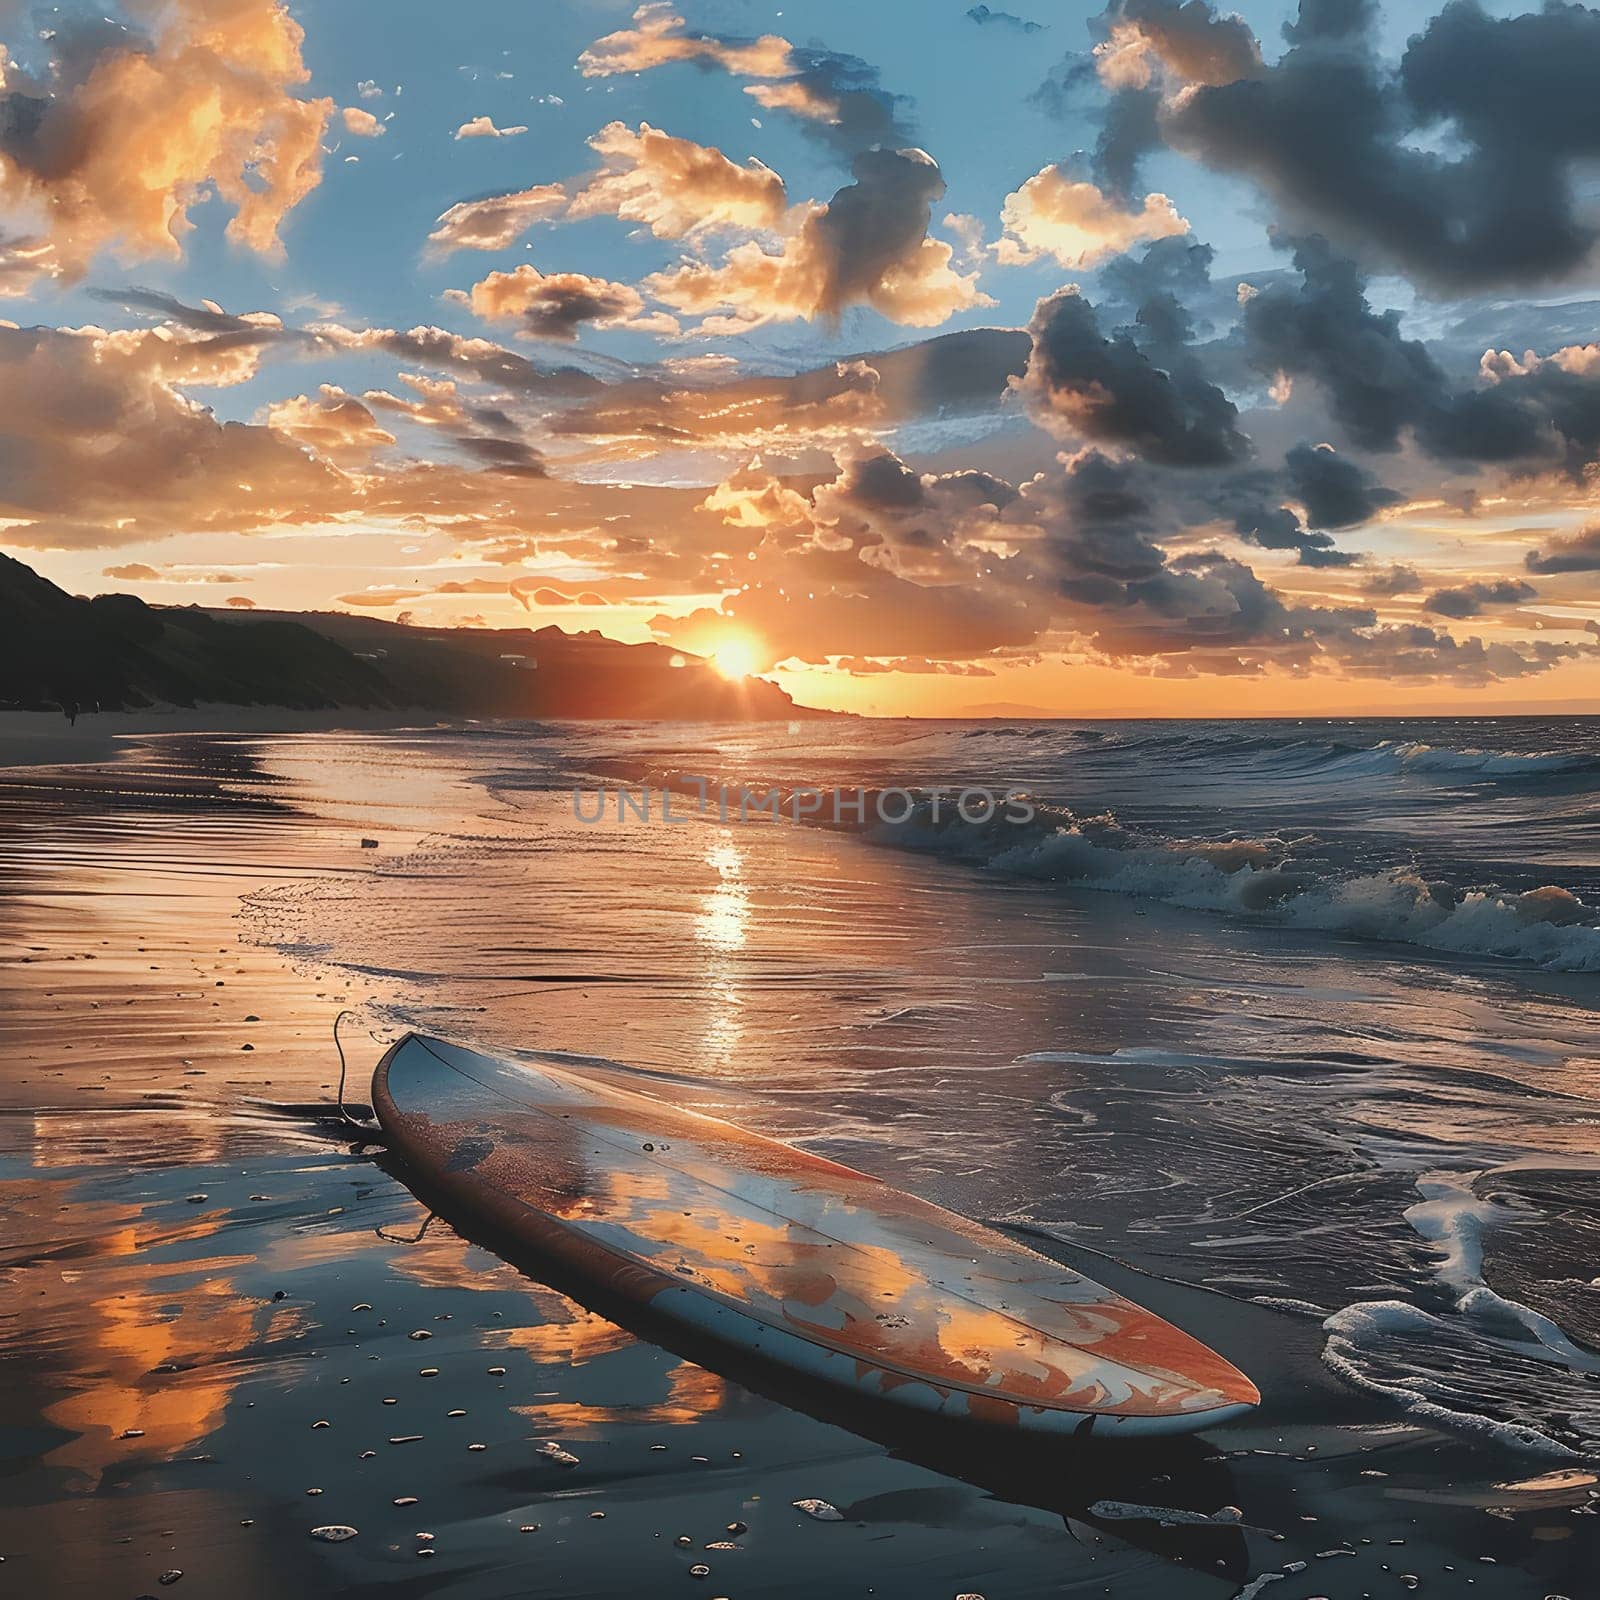 A surfboard rests on the sandy beach as the sun sets, casting a warm afterglow over the natural landscape. The sky is painted with hues of orange and pink, reflecting off the calm water